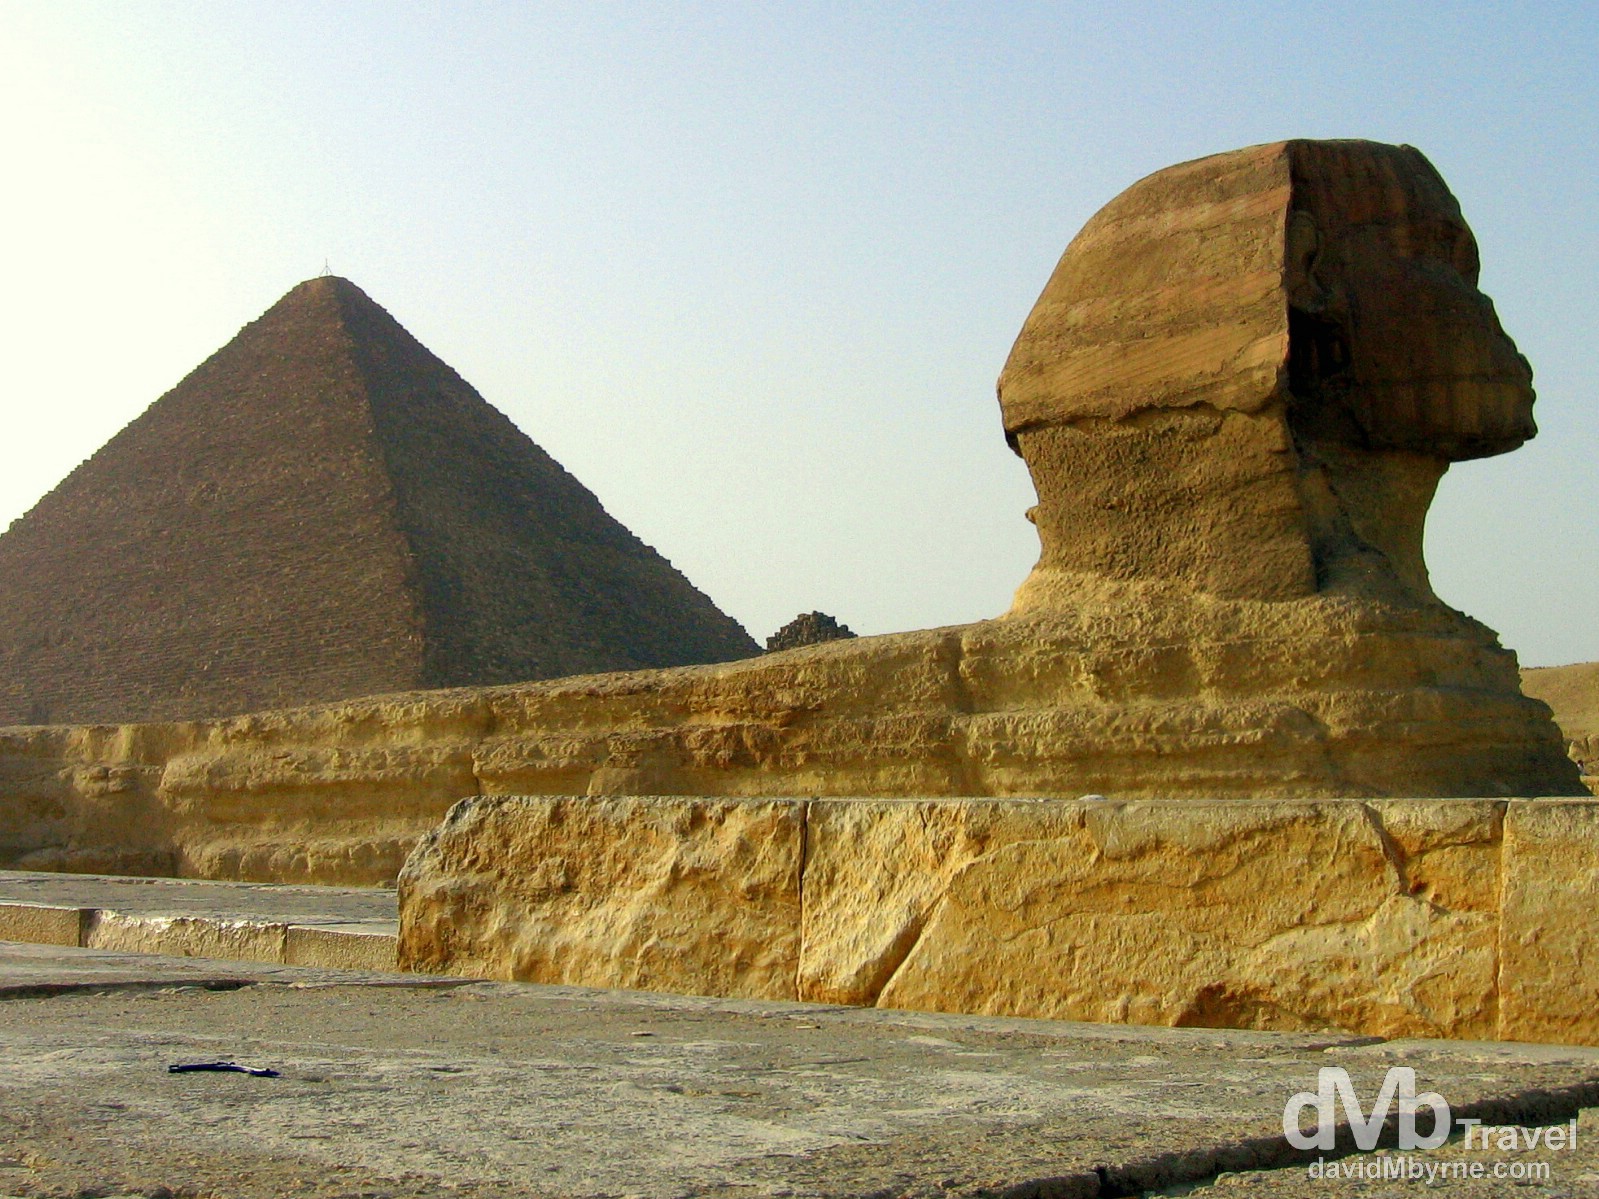 The Sphinx with the Great Pyramid of Khufu on the Giza Plateau, Giza, Egypt. April 13, 2008.